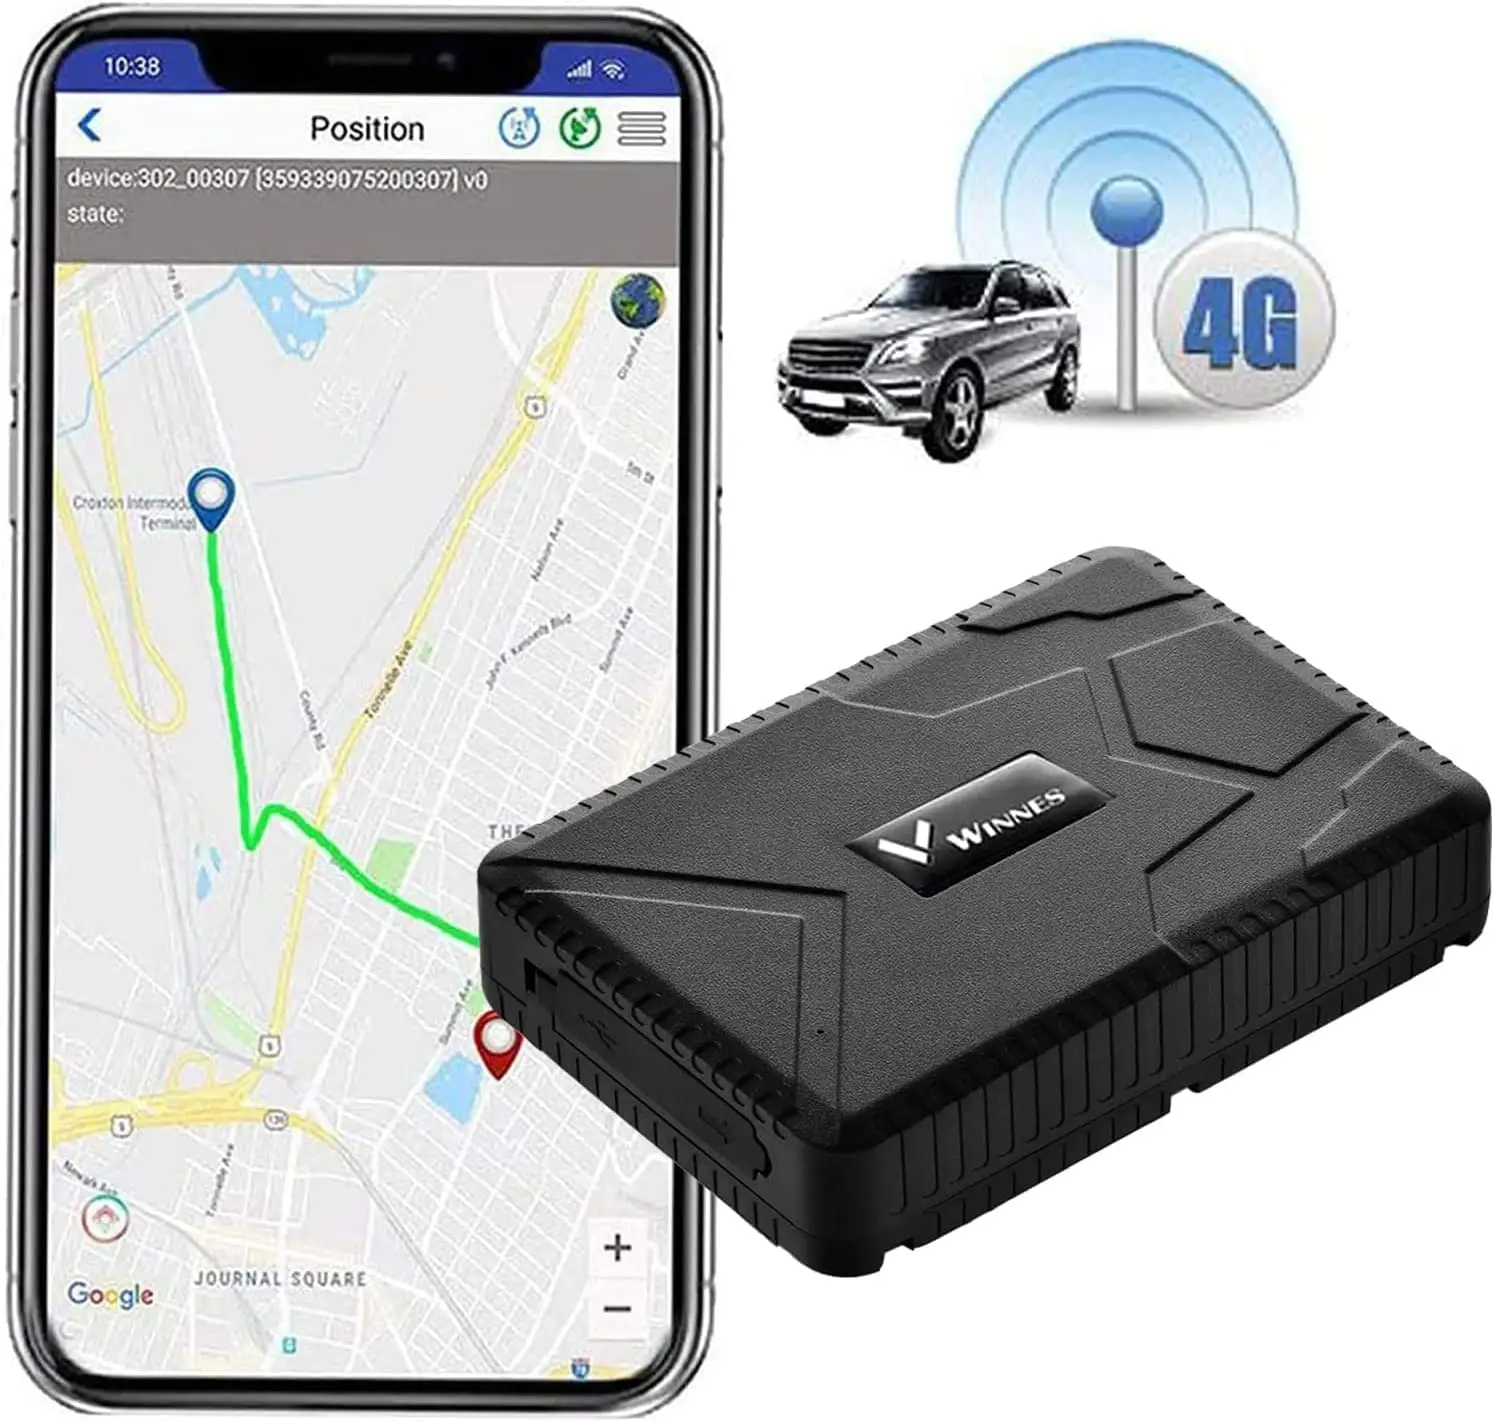 GPS Tracker for Vehicles, 4G LTE GPS Real Time Tracking Device Magnetic IP65 Waterproof Tracker for Car Rental, Fleet Management